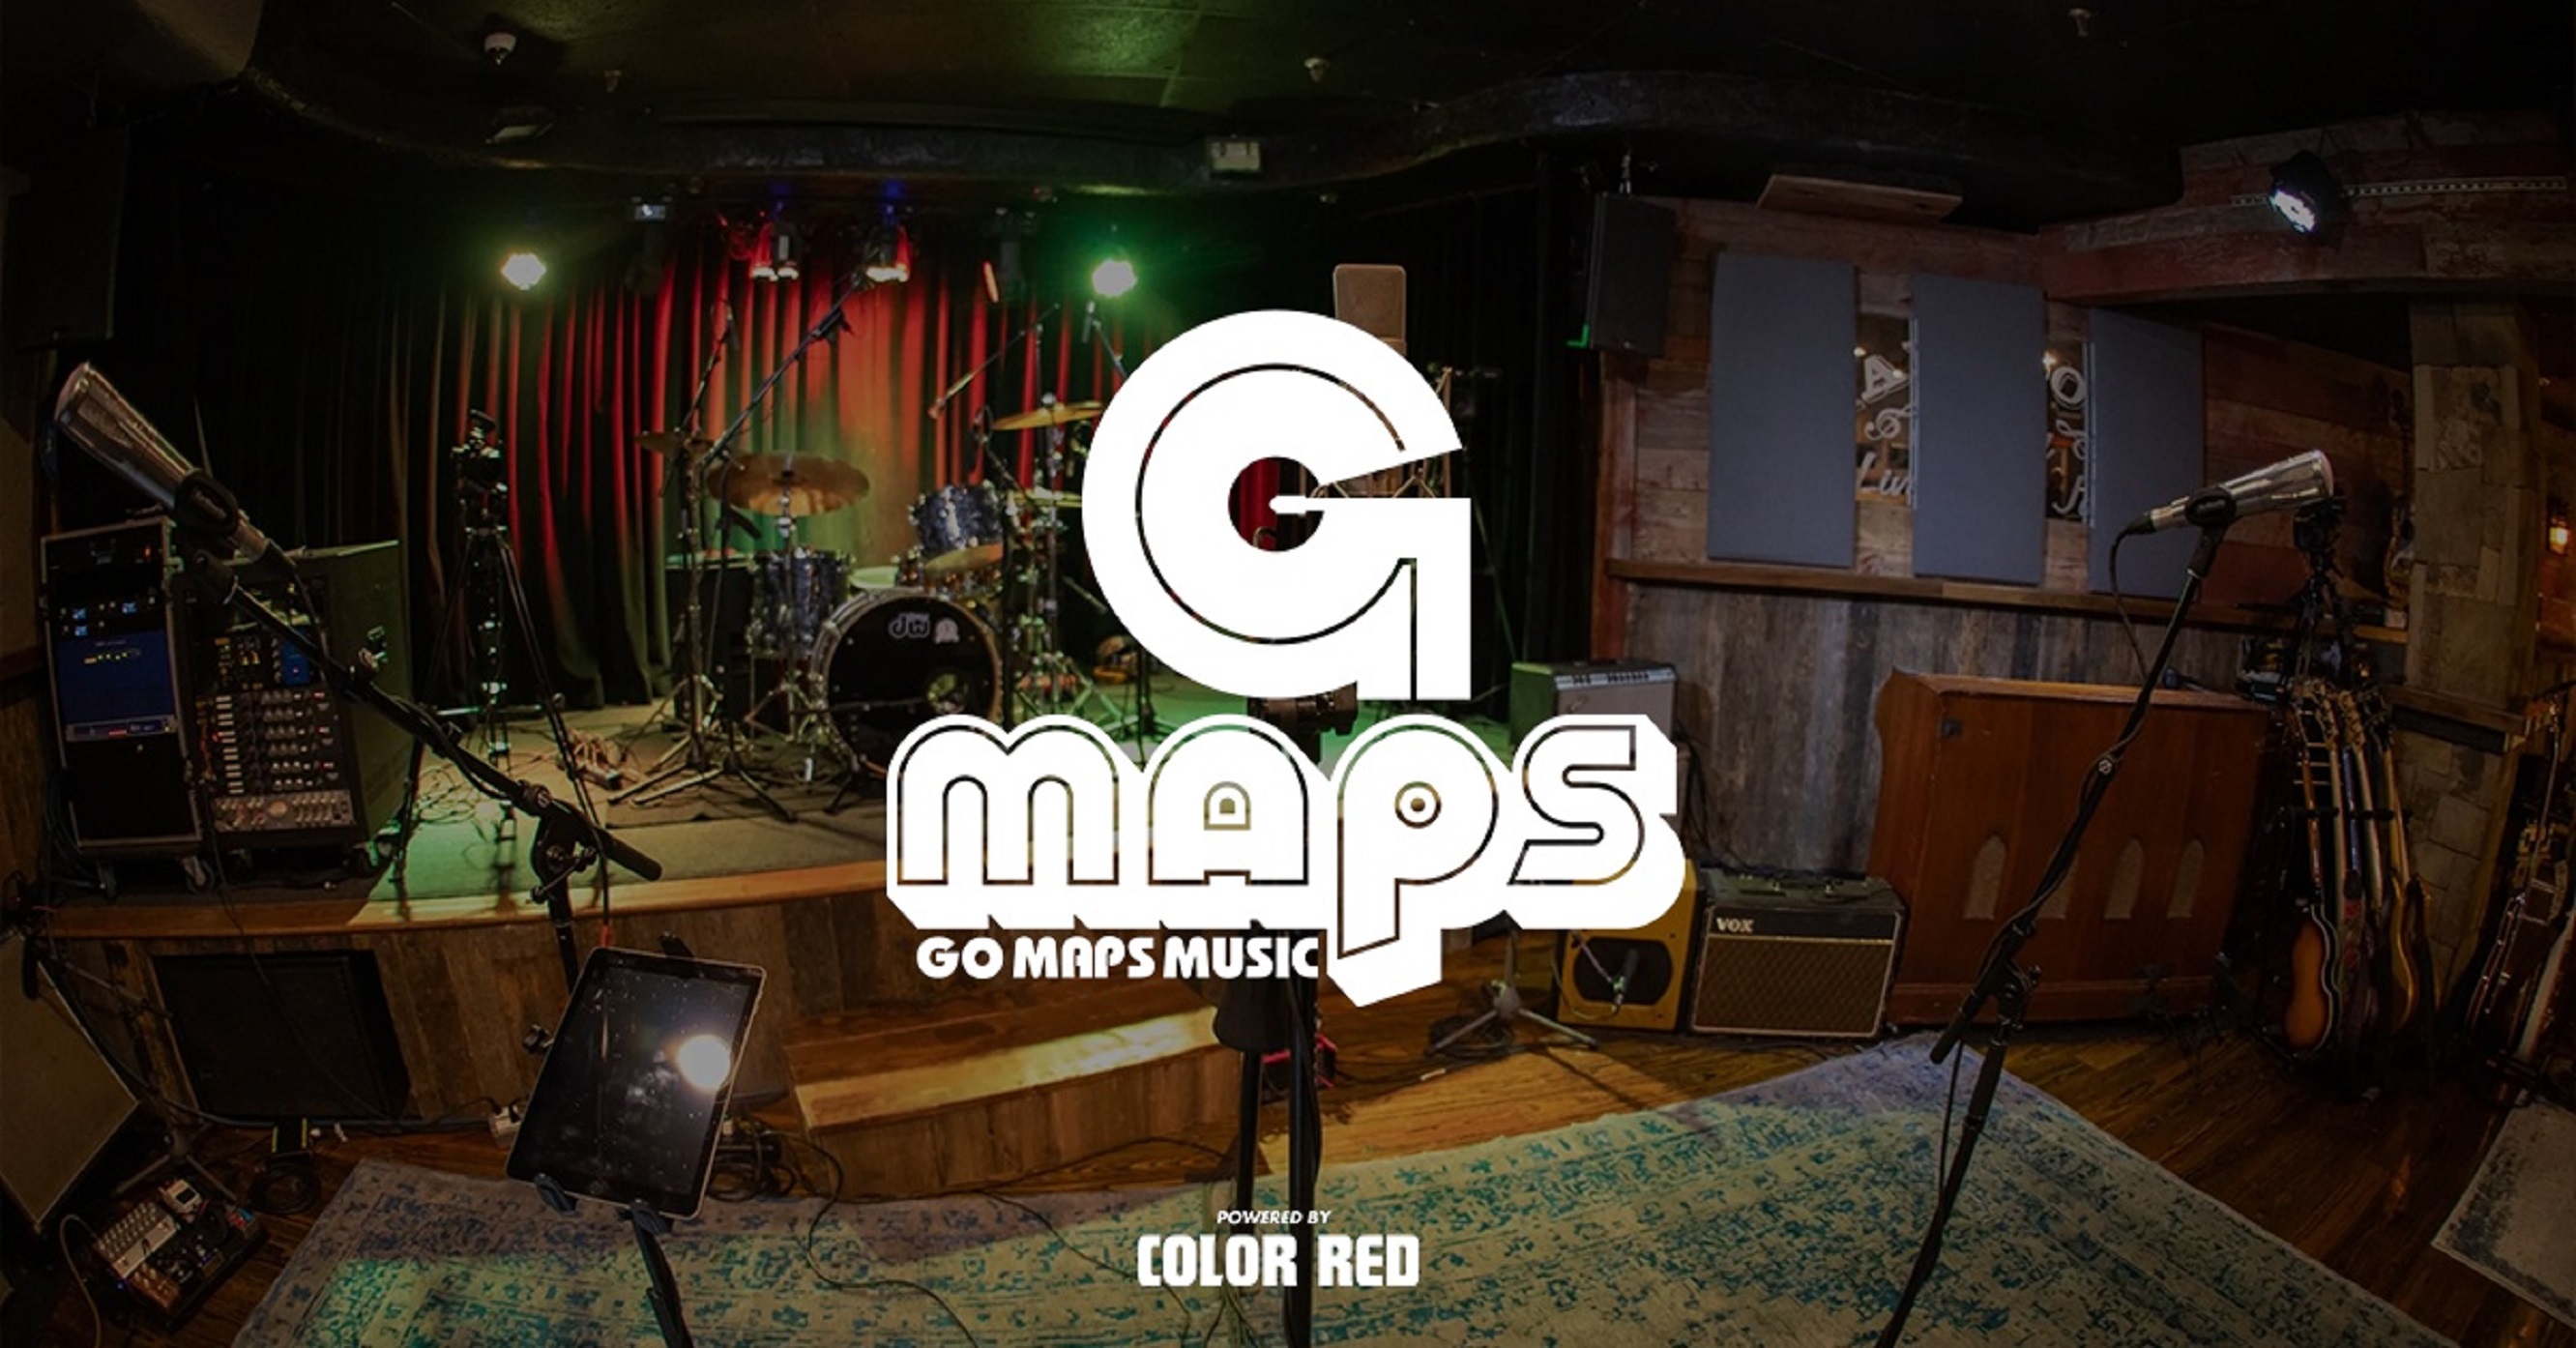 Non-profit organization MAPS Music Launches Record Label in Partnership with Color Red